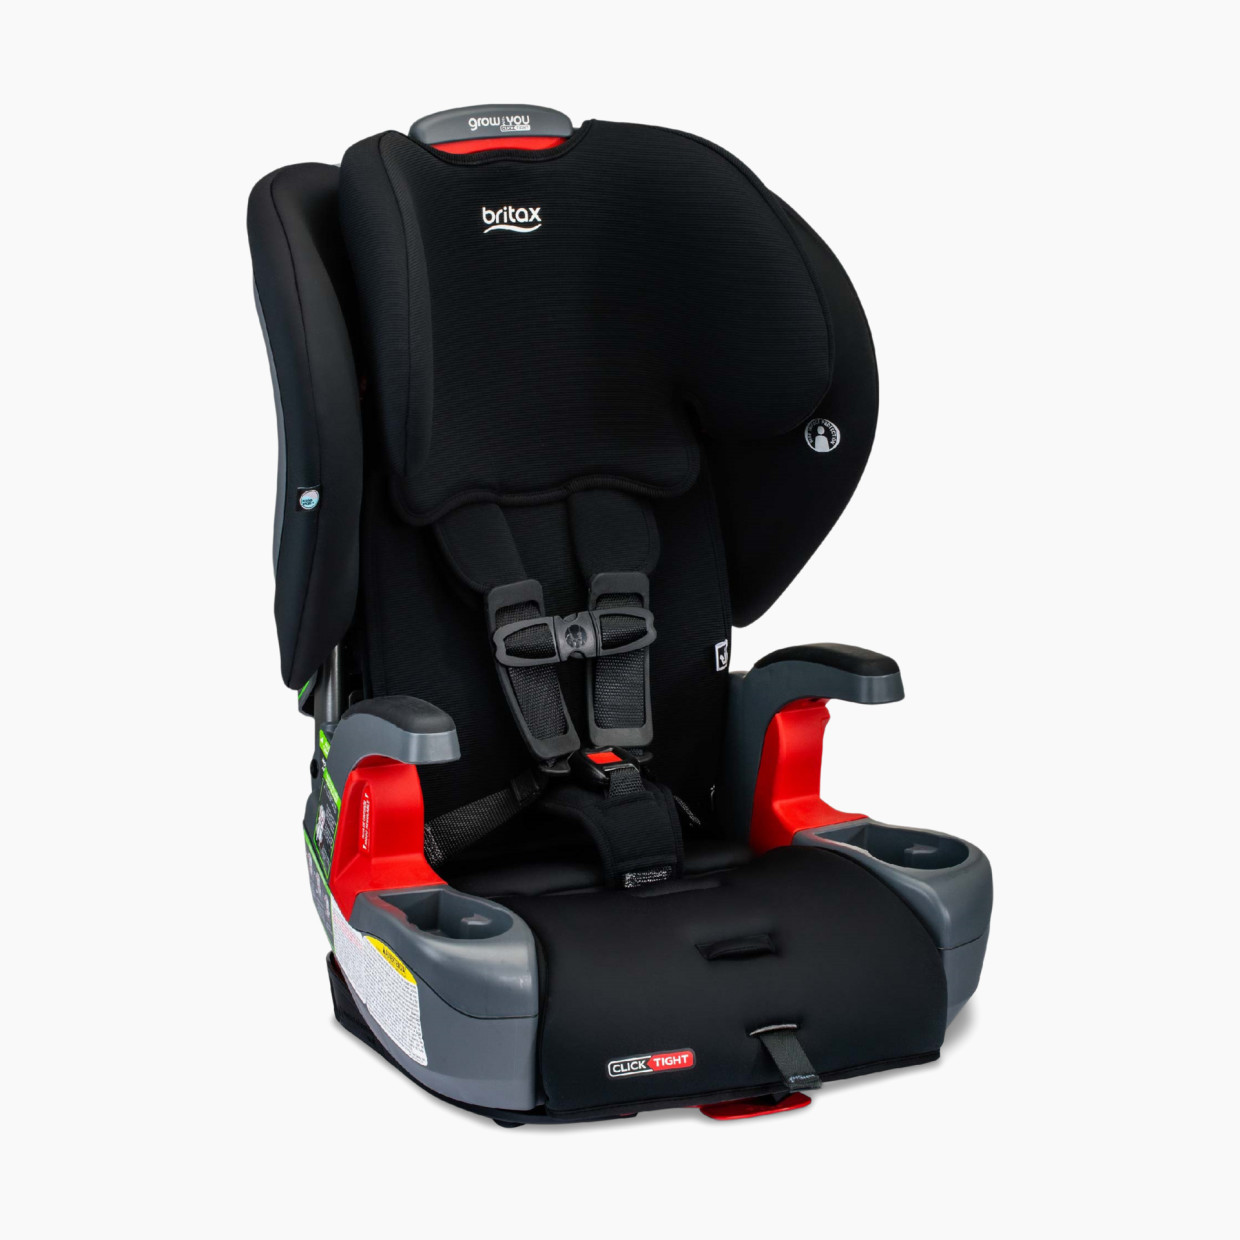 Britax Grow With You ClickTight Harness-2-Booster - Black Contour.